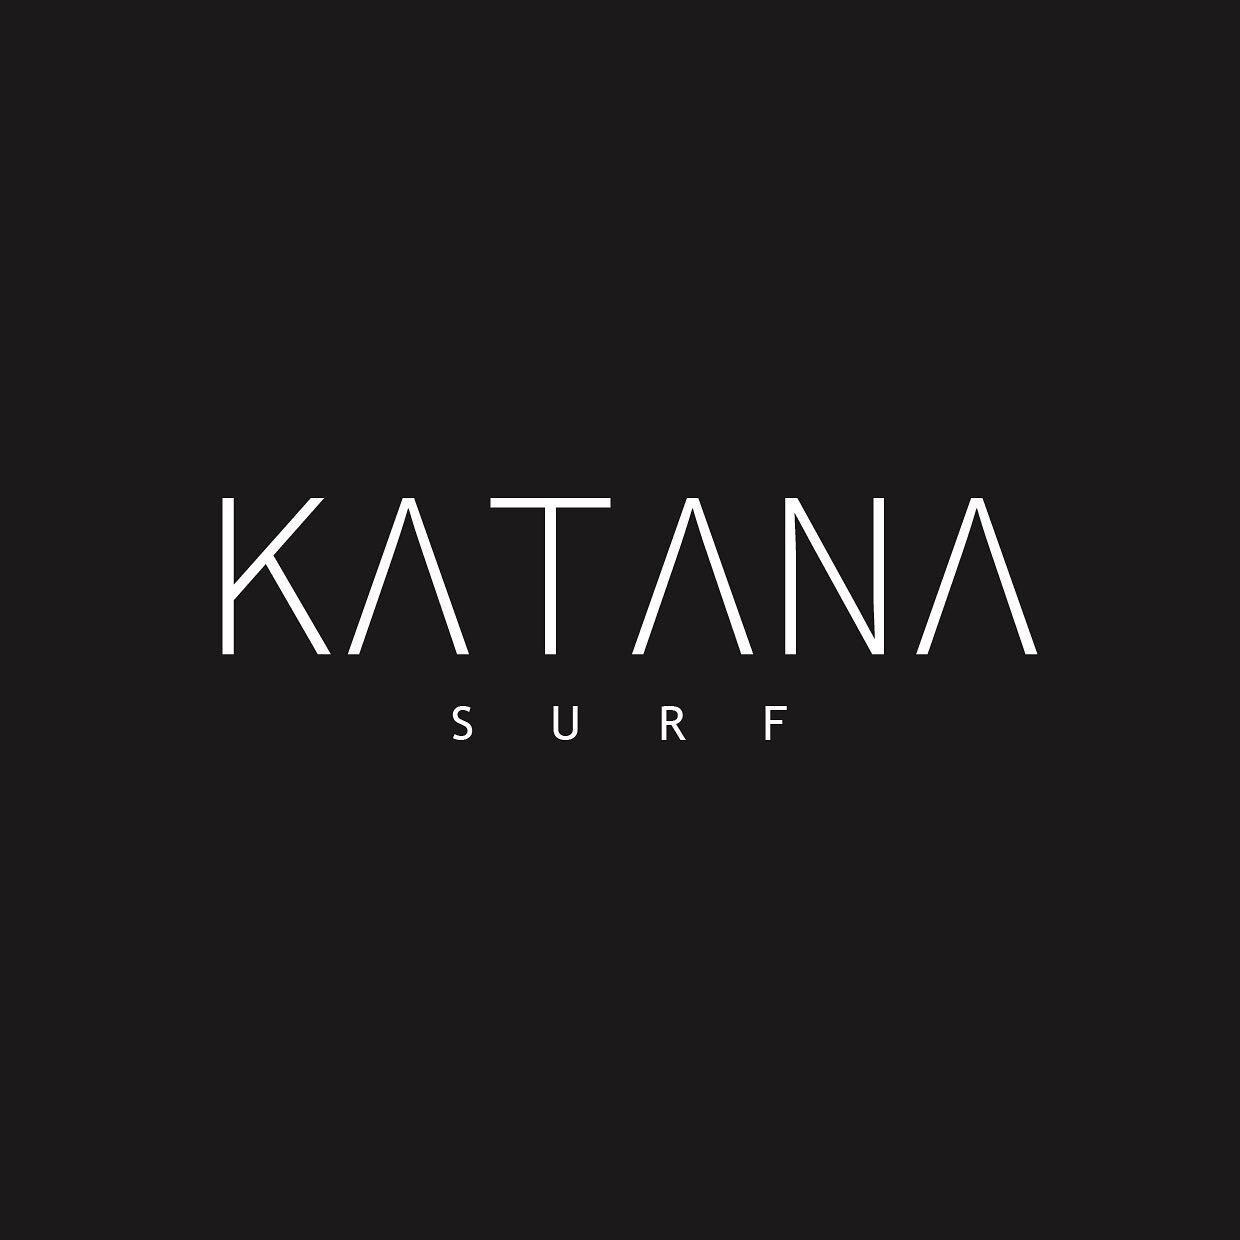 We're thrilled to announce that KatanaSurf is entering a new era, marked by the introduction of our brand-new logo! With a legacy dating back to 1981, we've amassed over 30 years of expertise, shaping more than 17,000 top-notch surfboards.

Our unwav